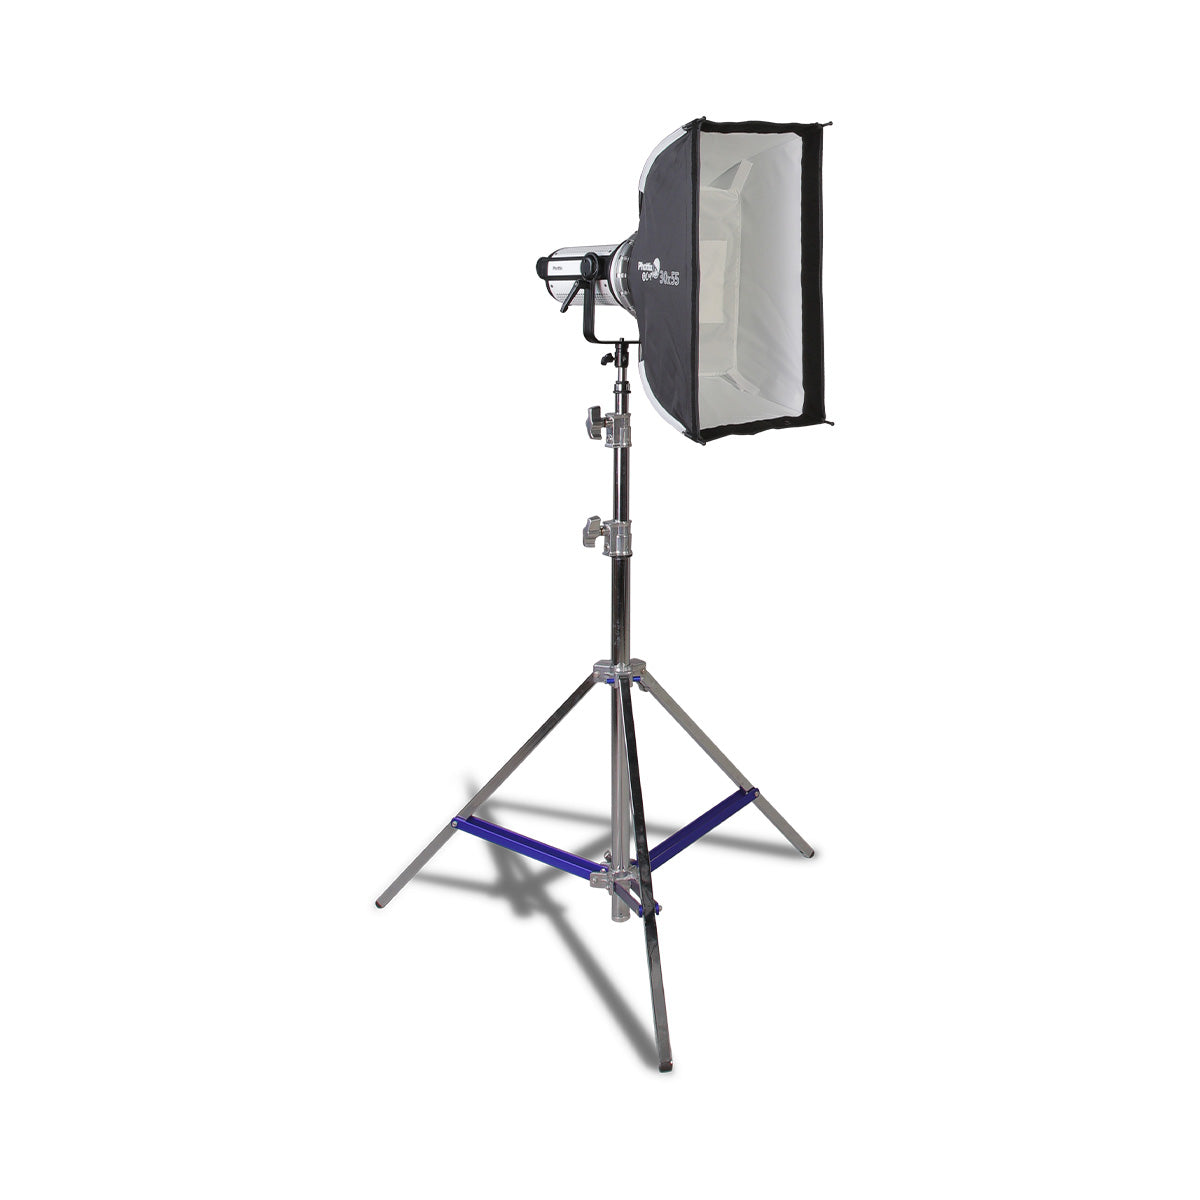 Phottix PH83725 G-Capsule 30 x 55cm EZ-Up Modifier Panoramic Rectangular Softbox with One Push Release Unlock Button, Magnetic Gel Filter Holder and Bowens Mount for Photography